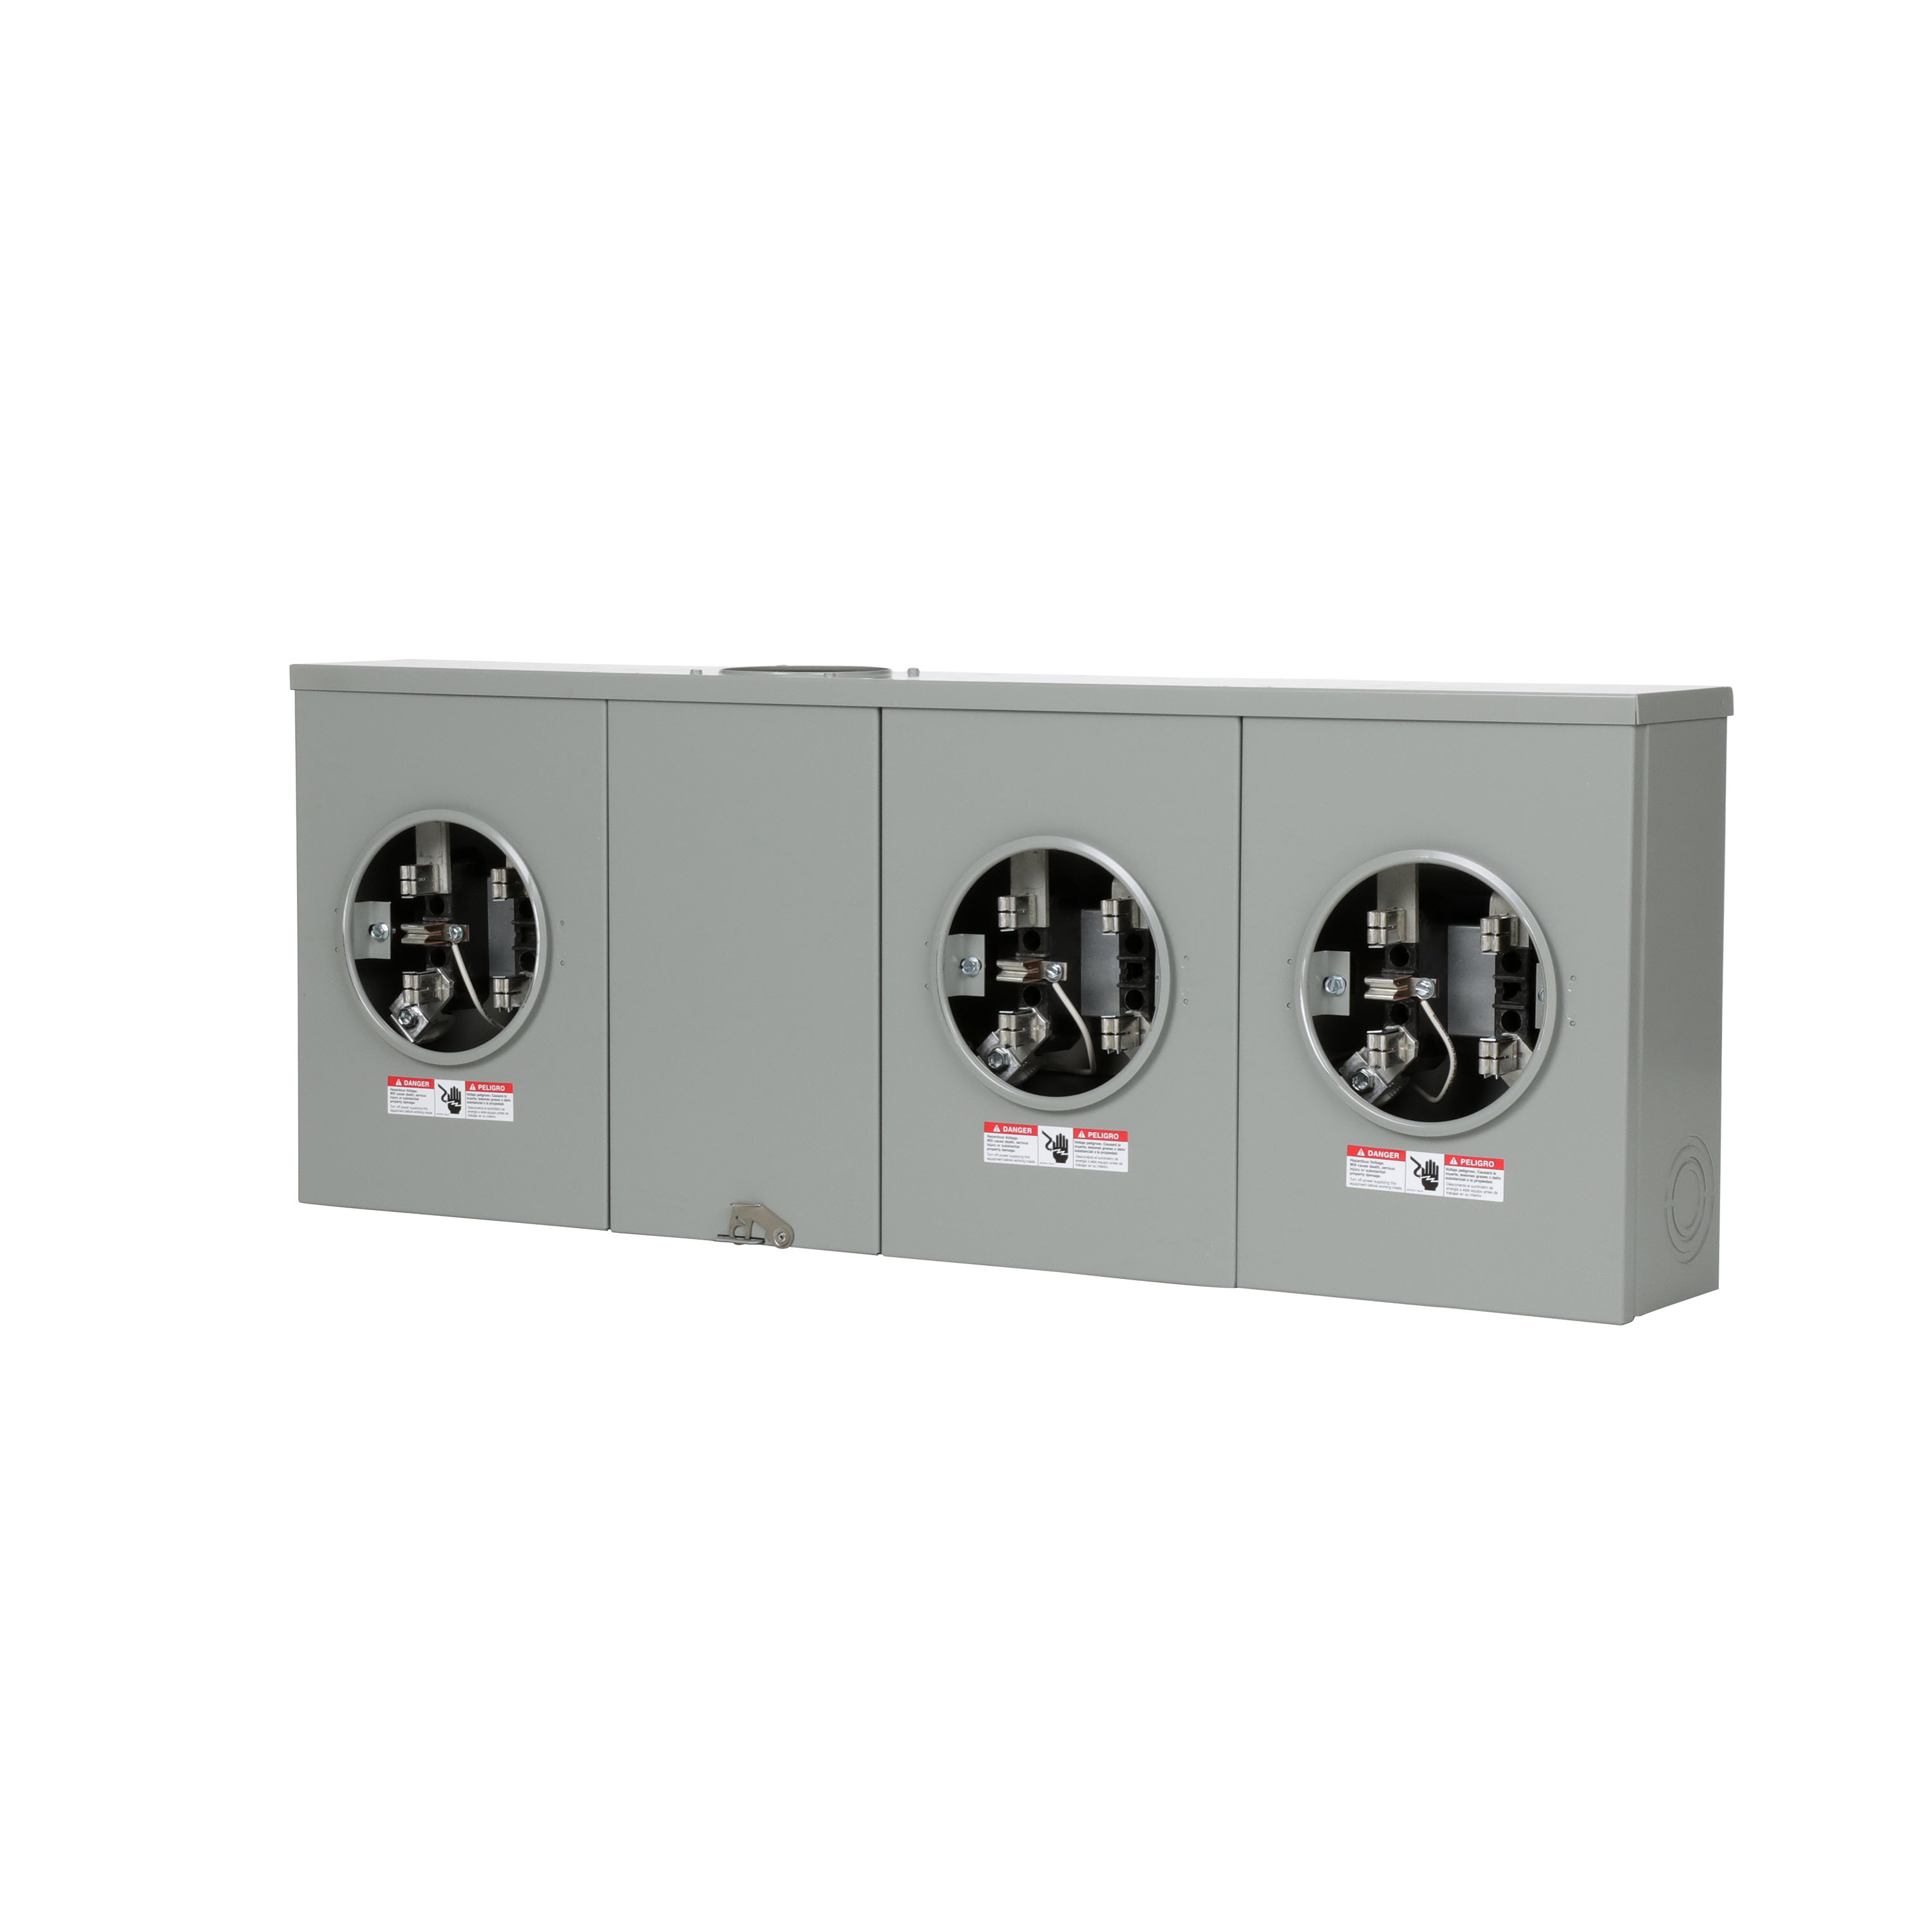 Siemens Low Voltage Talon Meter Sockets Residential - Talon Meter Sockets UAS8/9 Aluminum are Residential Enclosures Single-Family M etering. Type UAS8/9 Features NO BYPASS Application RESIDENTIAL Std UL V. Rating 300V A. Rating 200A PhaseSINGLE PHASE Size 6.0 x 15.0 x 40.0 No Of Cutouts 11 Cutout Size 8 x (1, 1-1/4,1-1/2, 2, 2-1/2), 1 x (2, 2-1/2, 3), 1 x 1/2, 1 x 4.281 Cable Entry OH/UG Terminals 4. Surface mounting. Operating Temperature Avg AMBIENT Enclosure AL